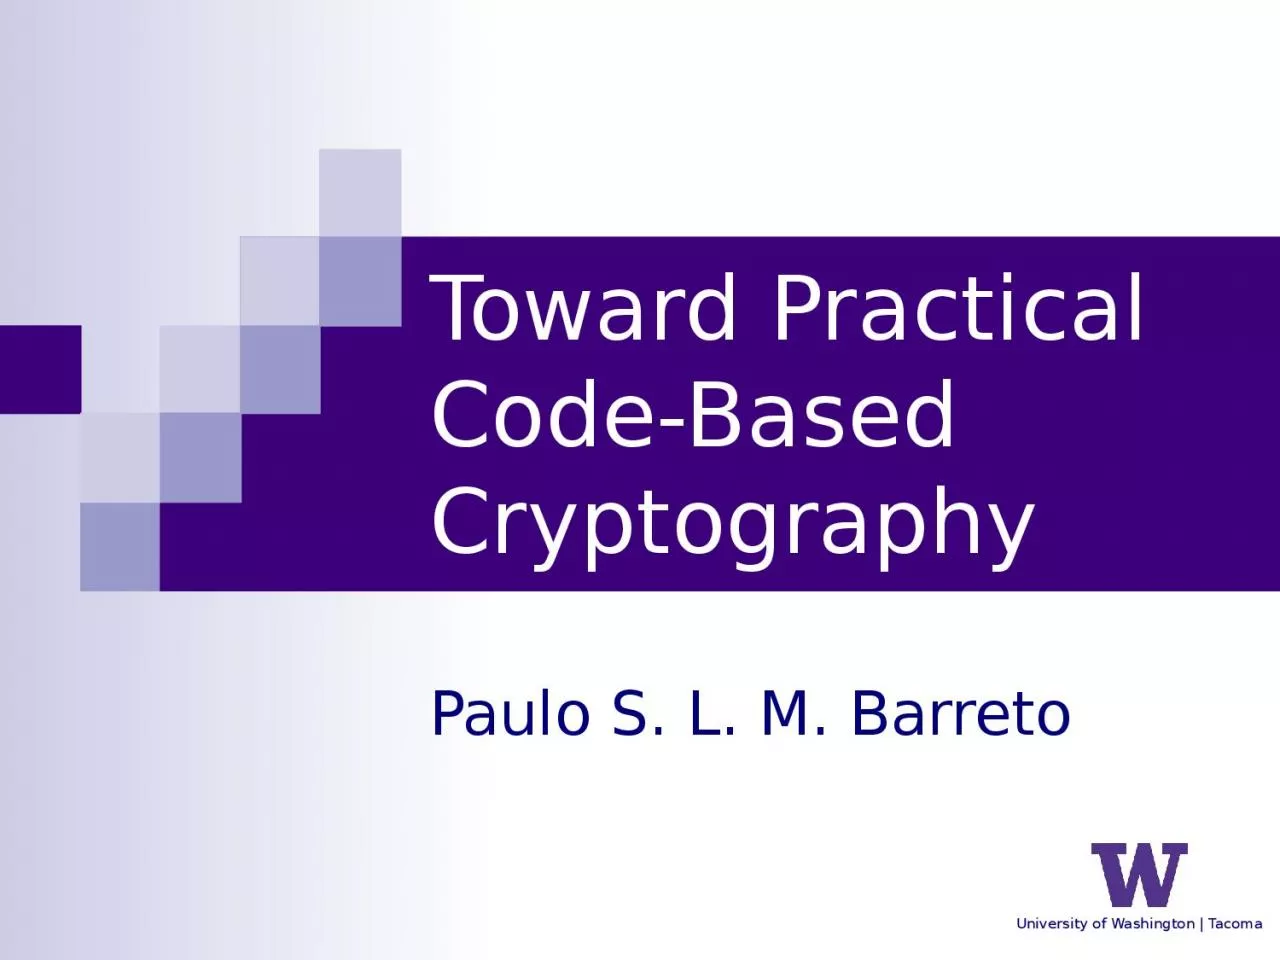 Toward Practical Code-Based Cryptography